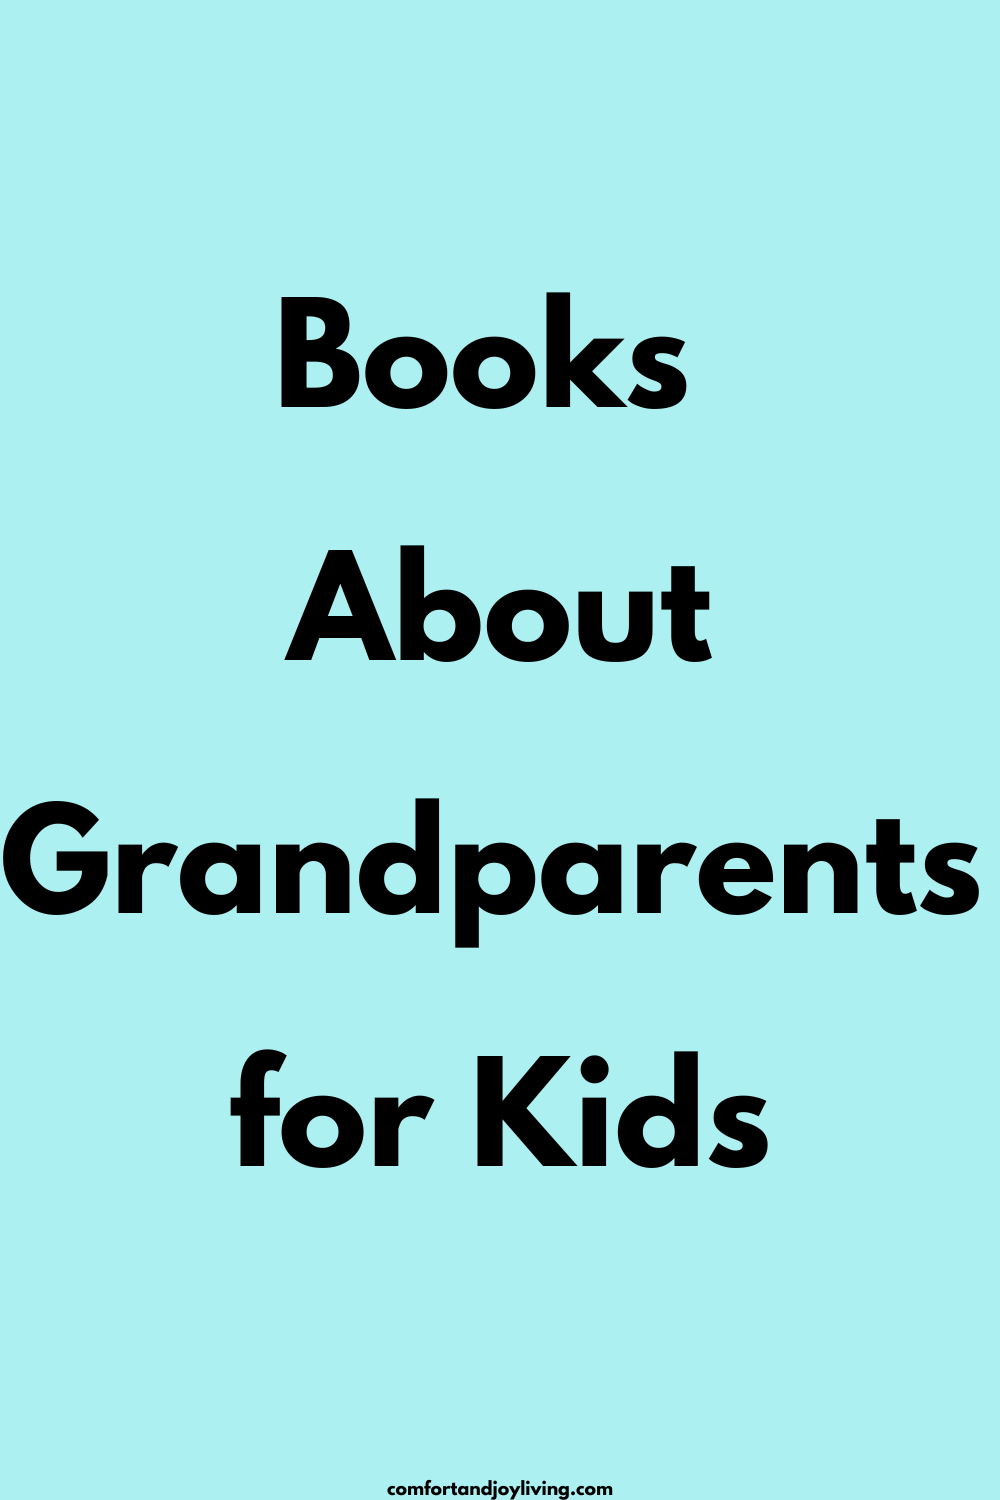 Books About Grandparents for Kids